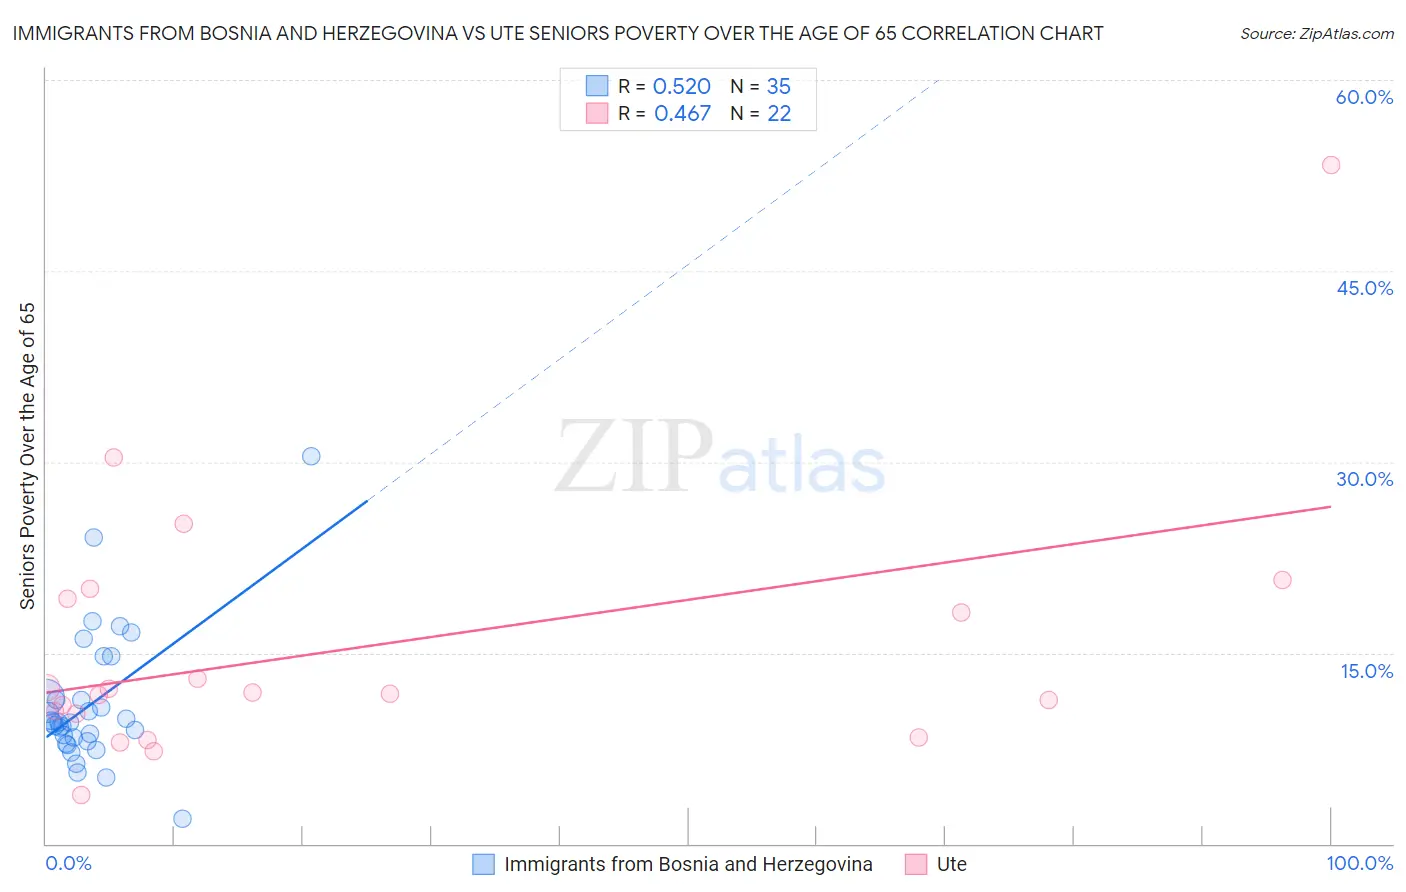 Immigrants from Bosnia and Herzegovina vs Ute Seniors Poverty Over the Age of 65